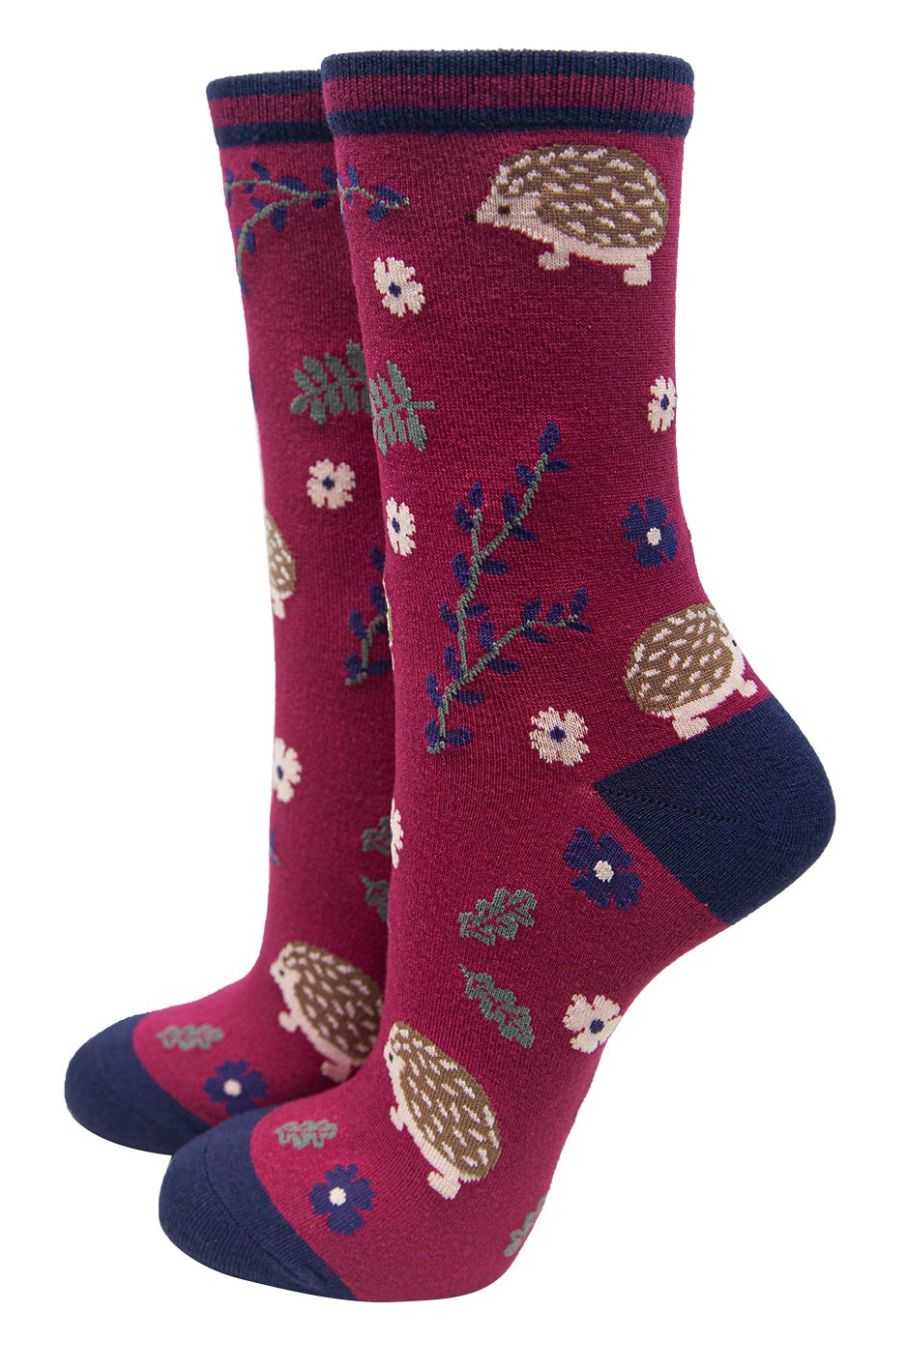 deep pink and navy blue ankle socks with hedgehogs and a floral print